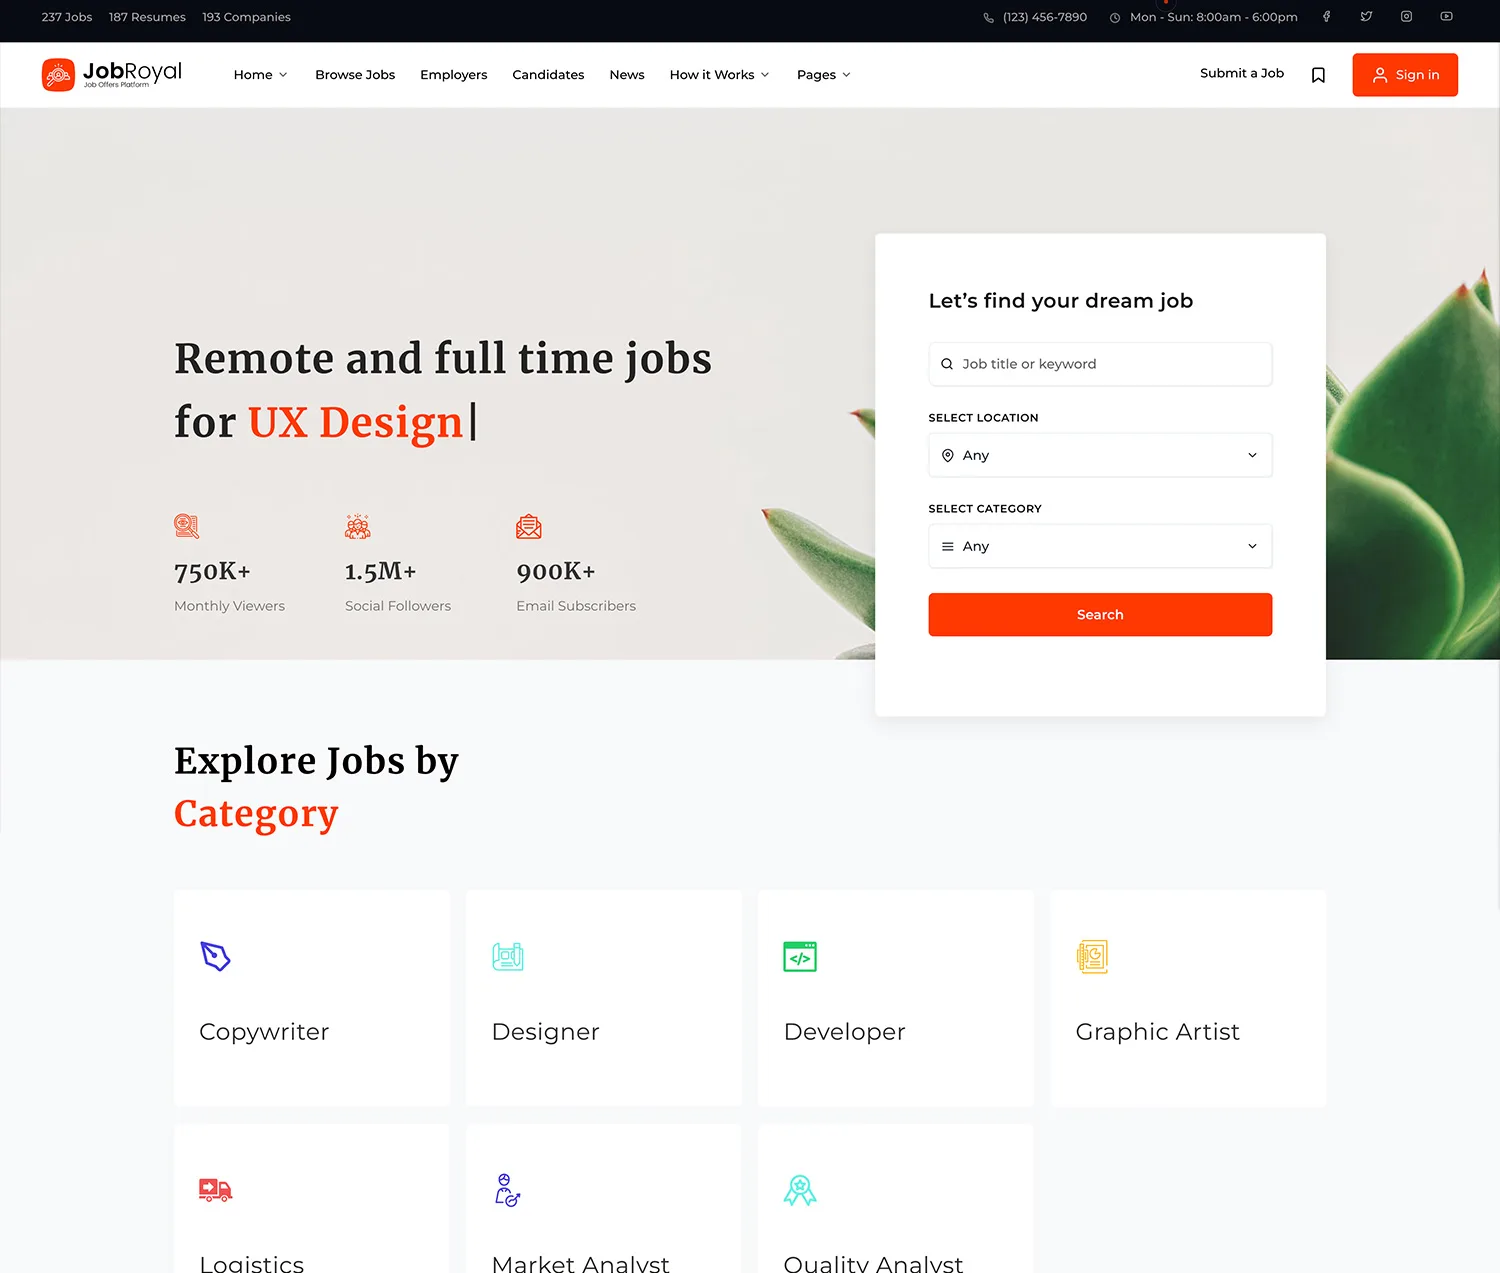 JobRoyal Work Positions Board and Resumes WordPress Theme: A Comprehensive Review